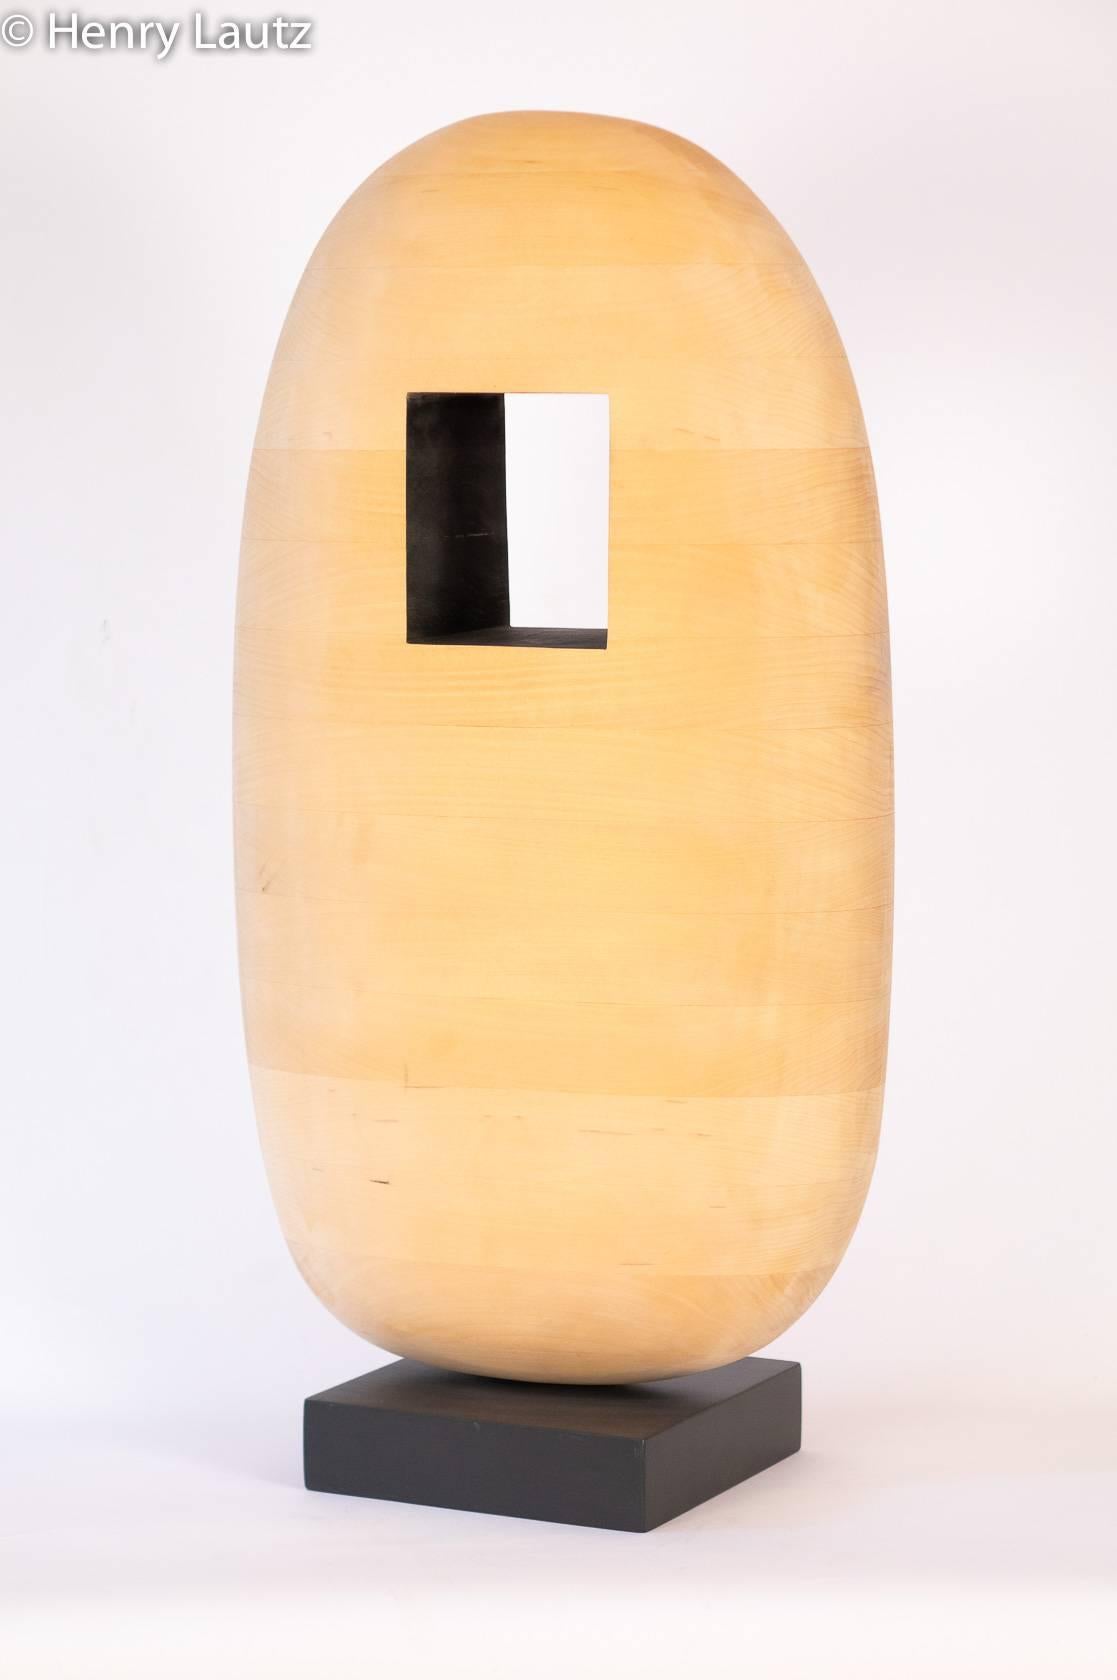 Hopewell Elergy No.4 - Sculpture by Henry Lautz